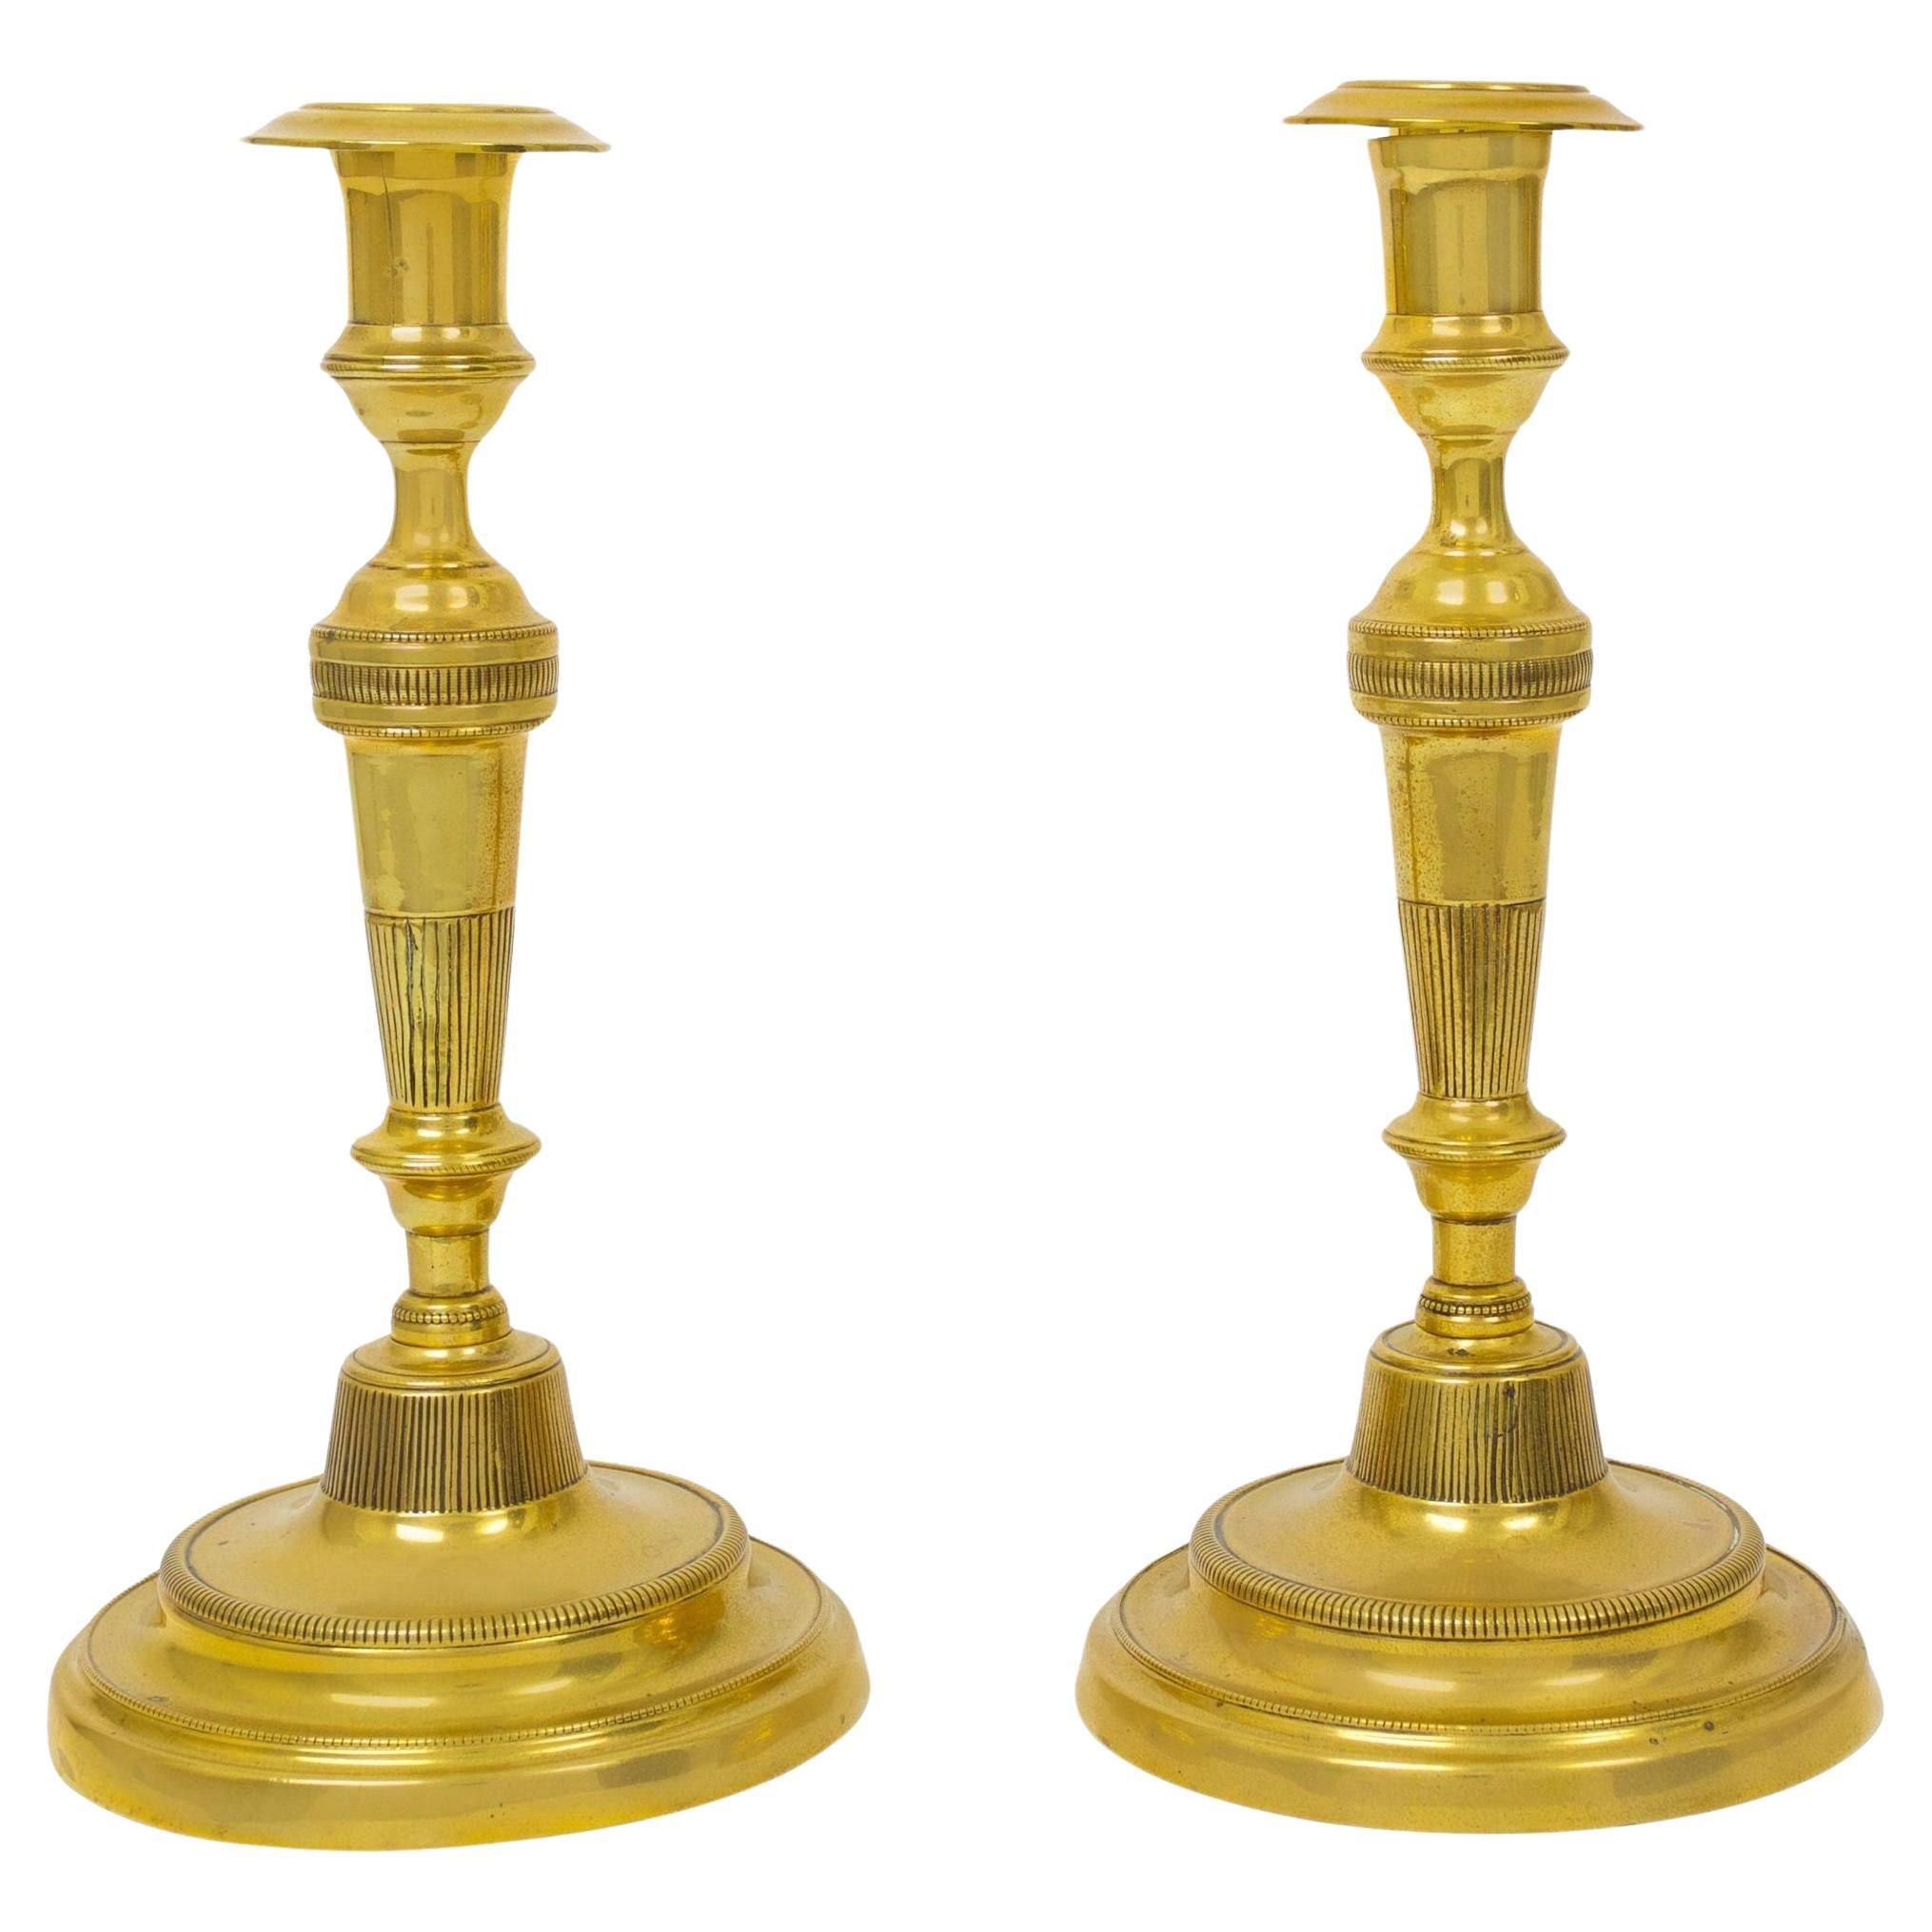 Pair of French Brass Directoire Period Antique Candlesticks, Early 19th Century